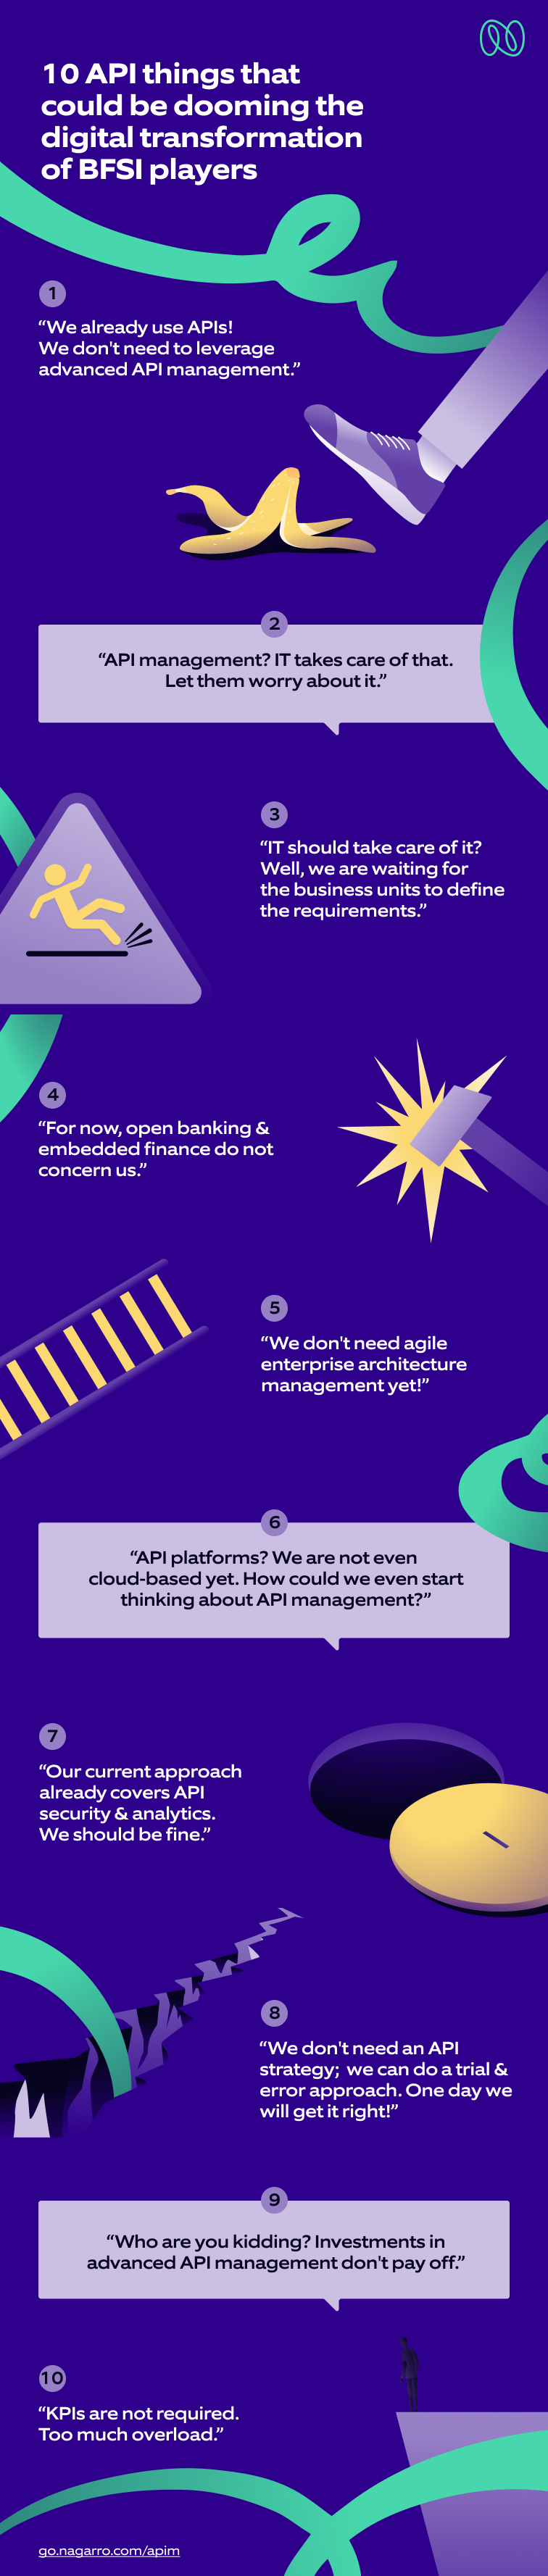 10 API things that could be dooming the digital transformation of BFSI players_Infographic